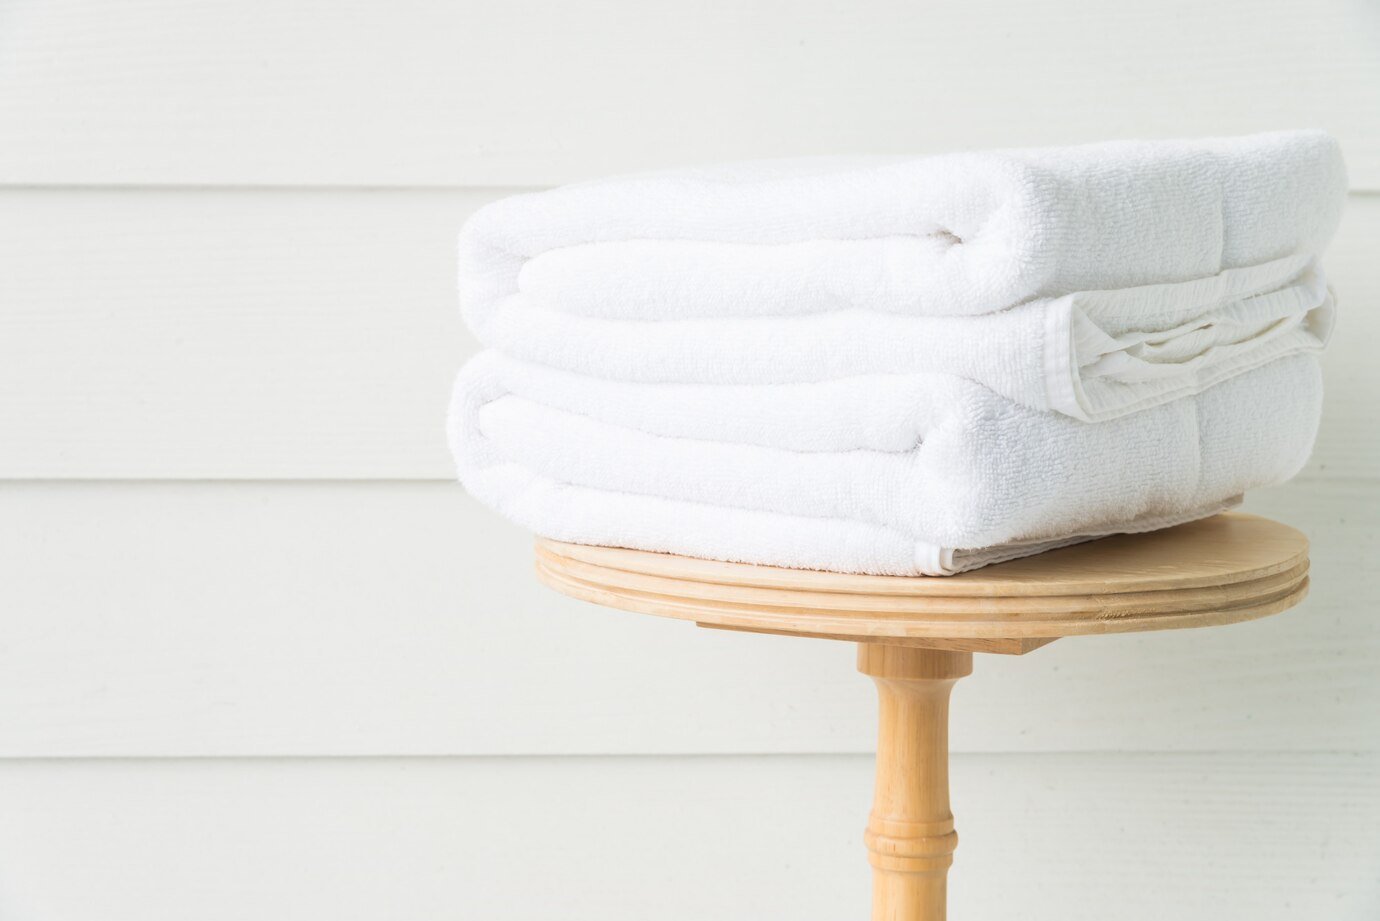 5 Points To Consider When Buying A Good Quality Towel